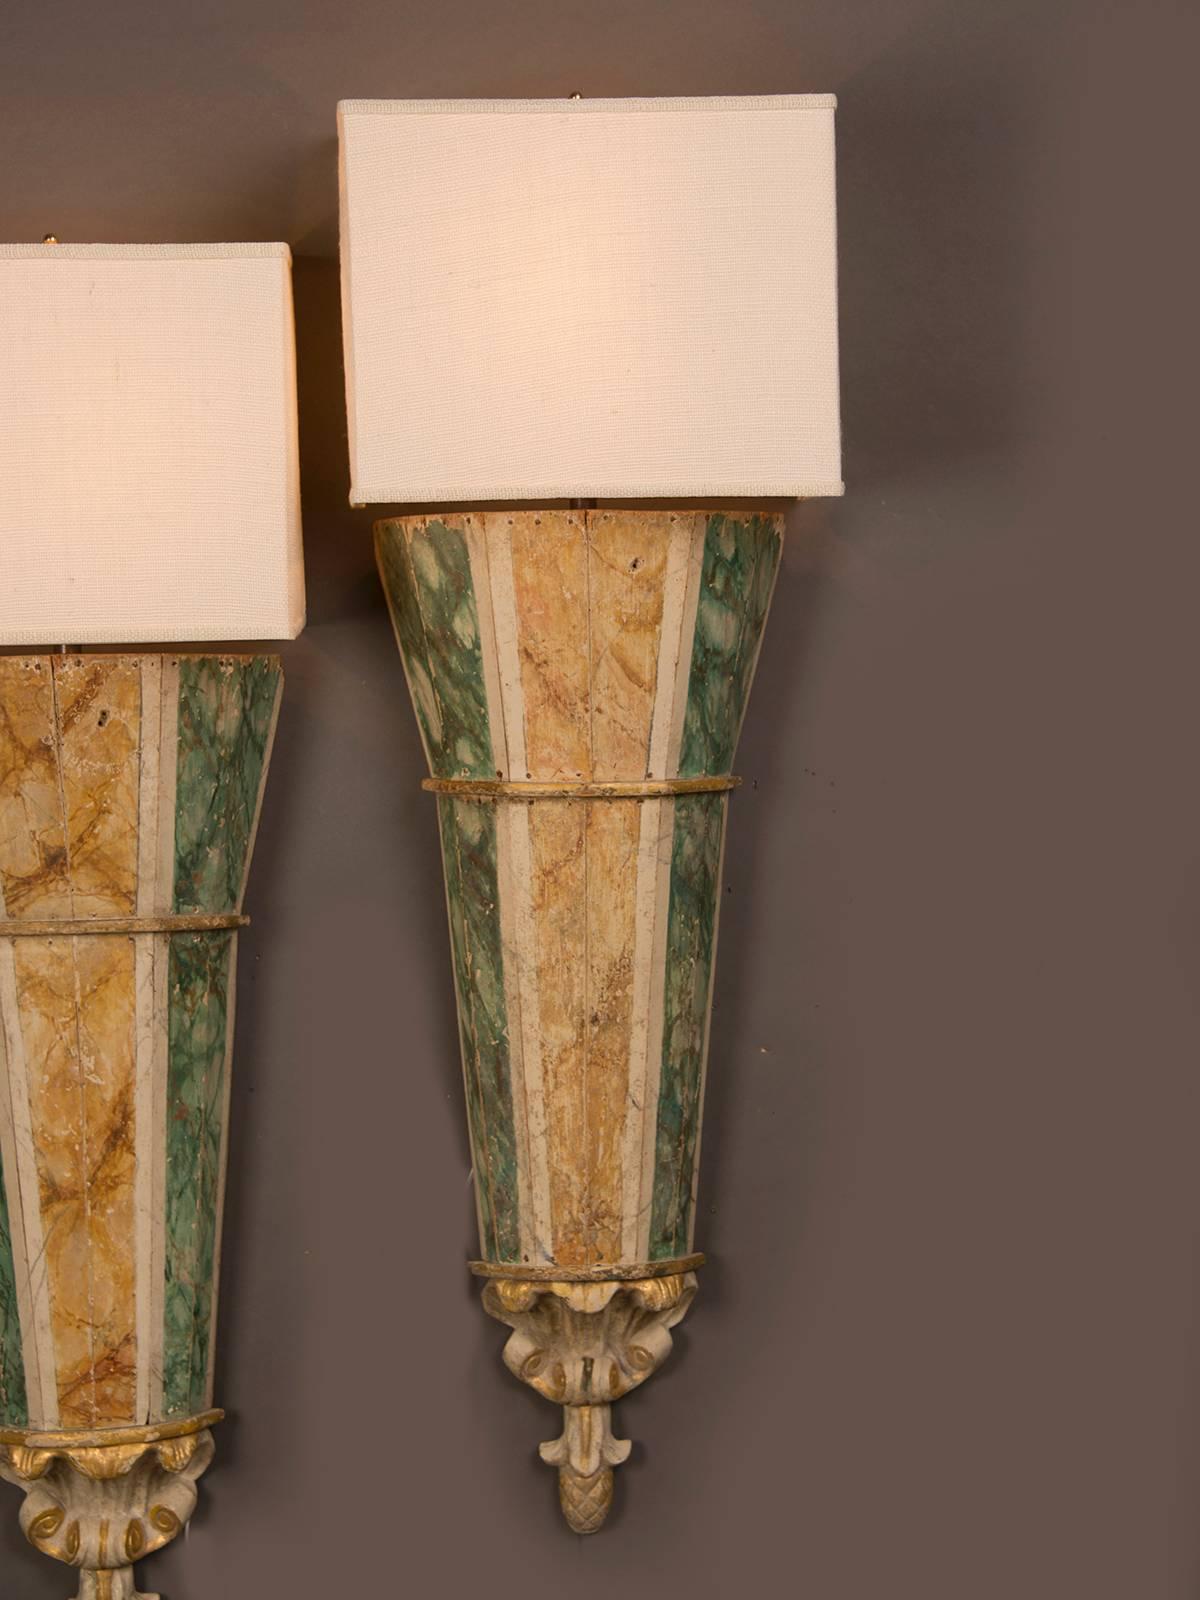 Receive our new selections direct from 1stdibs by email each week. Please click Follow Dealer below and see them first!

A pair of sconces having a grand scale from Italy, circa 1820 each retaining the original painted finish on wood simulating